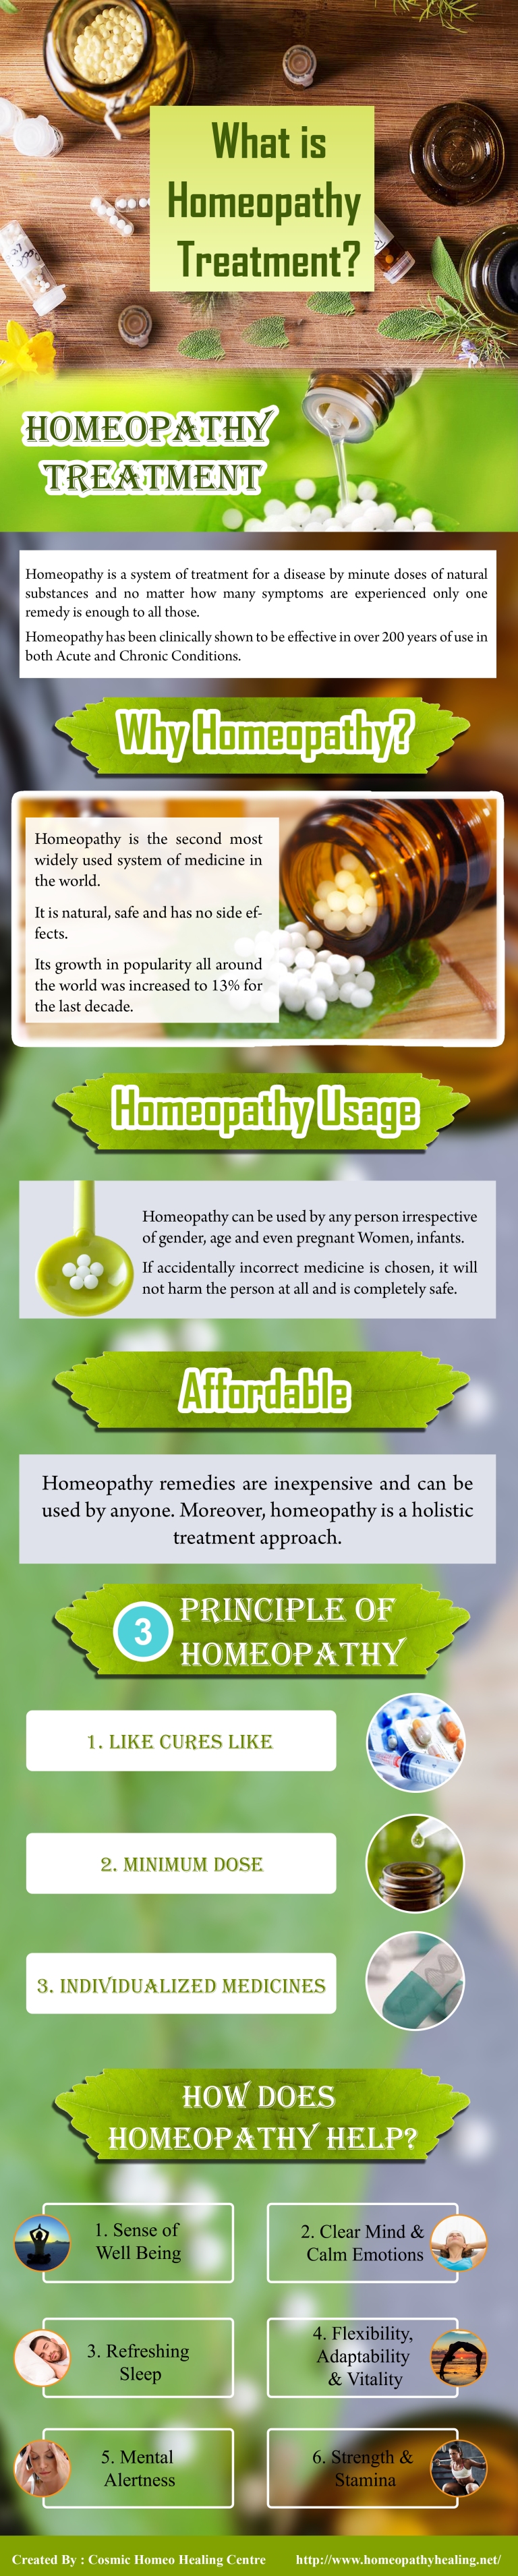 What is Homeopathy Treatment